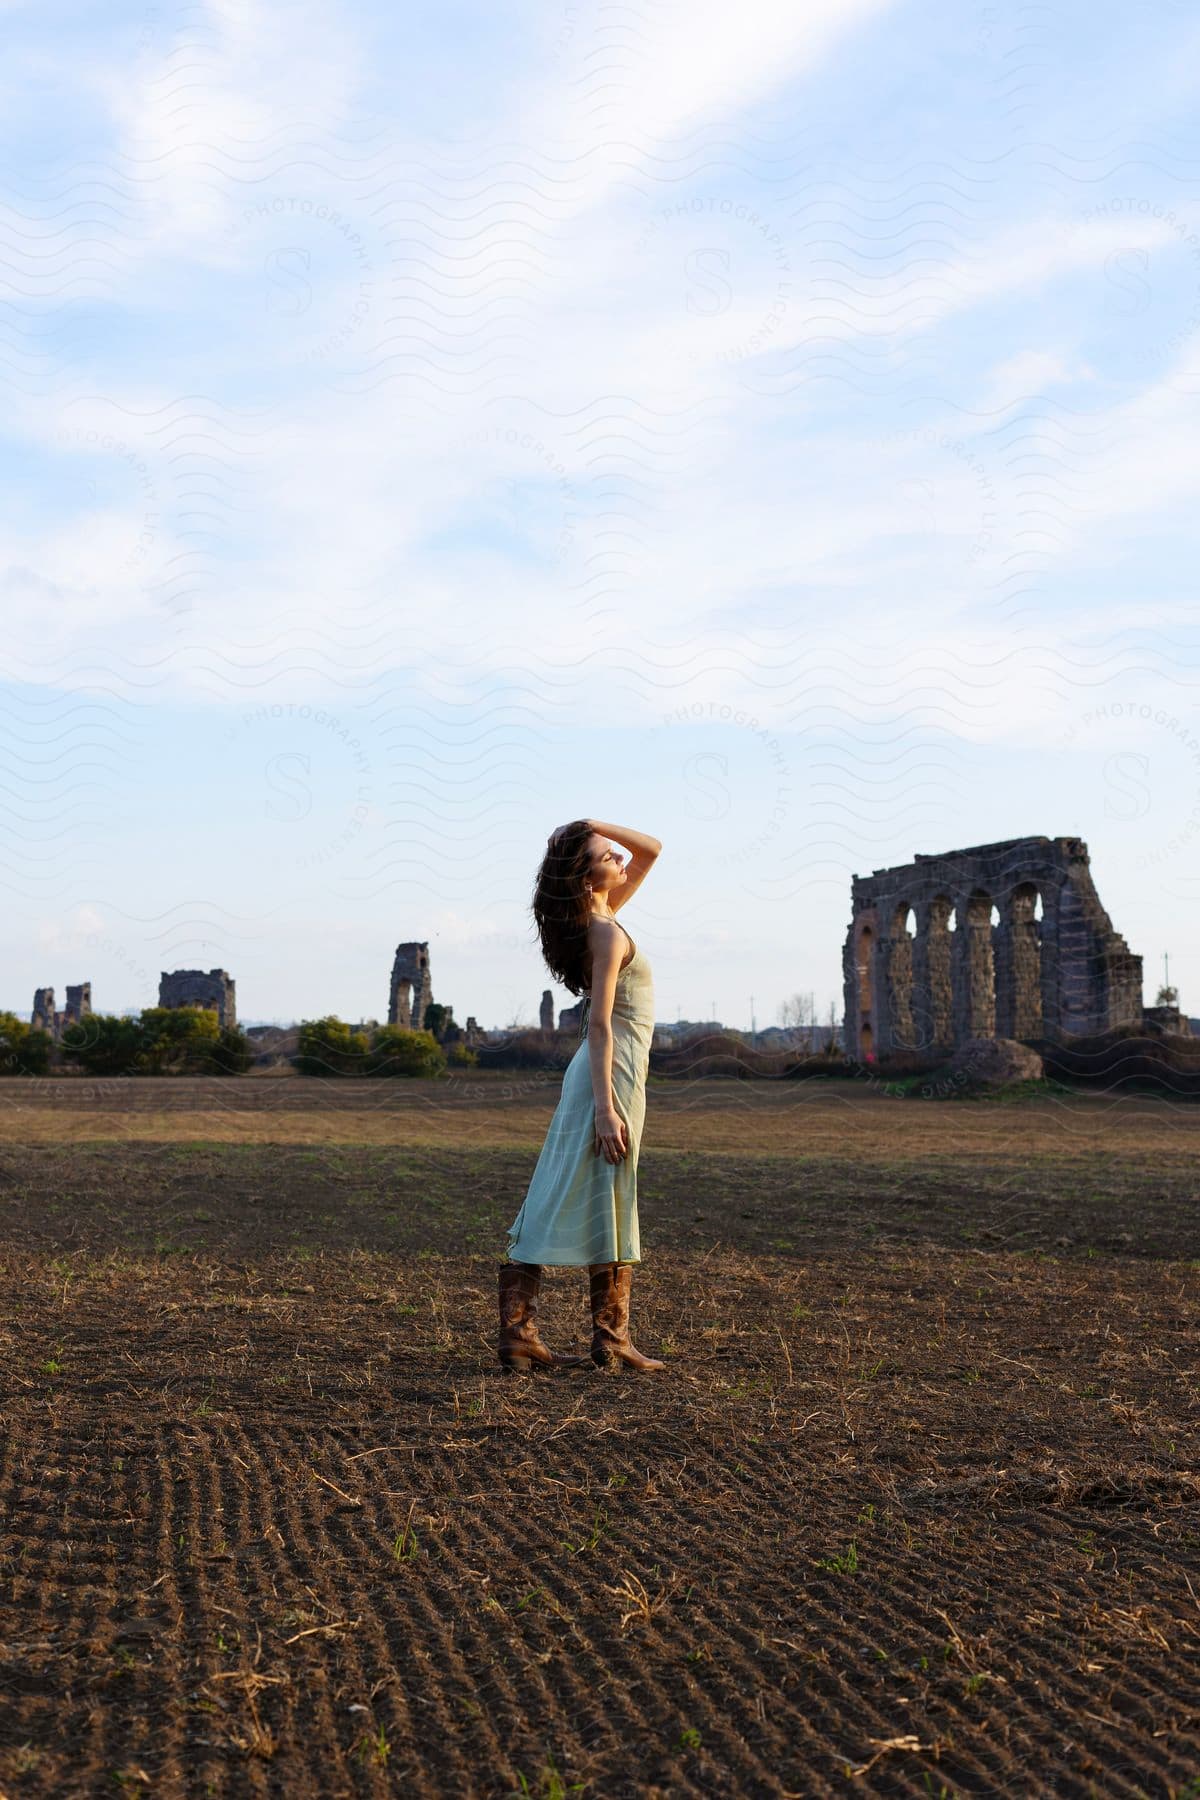 A woman models clothing in a field, with the ruins of Aqua Claudia in the background.